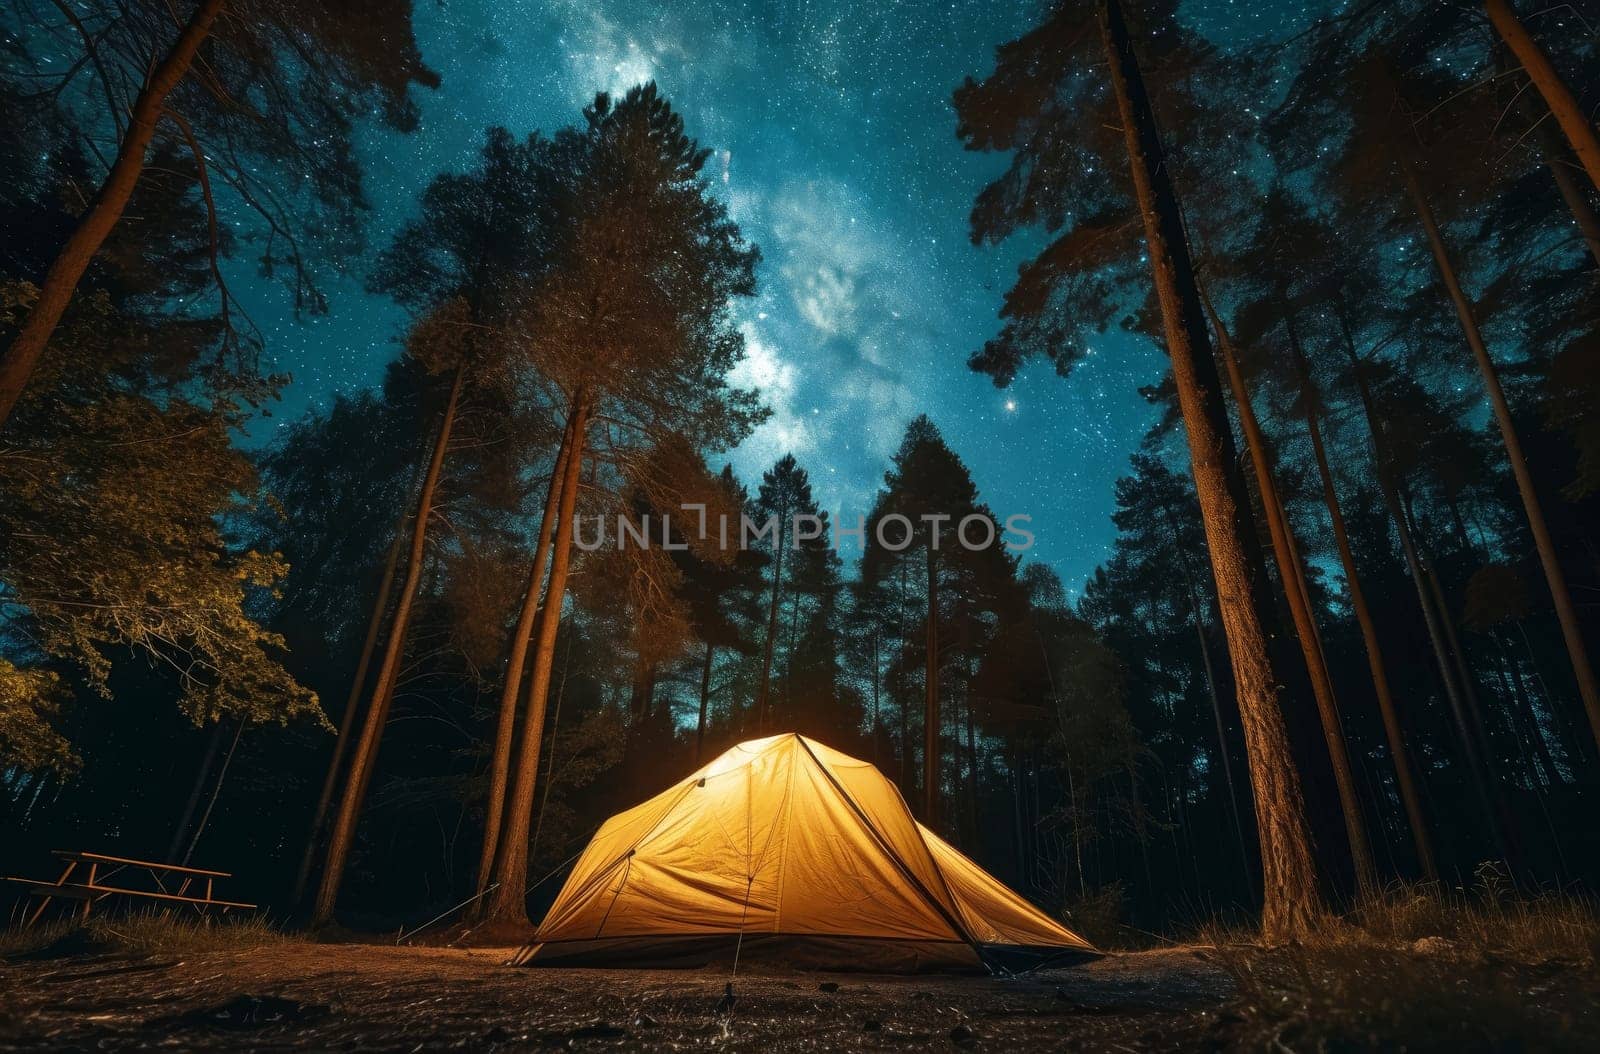 Illuminated tent under a breathtaking starry sky amidst towering pine trees, capturing the essence of wilderness camping and nocturnal adventure